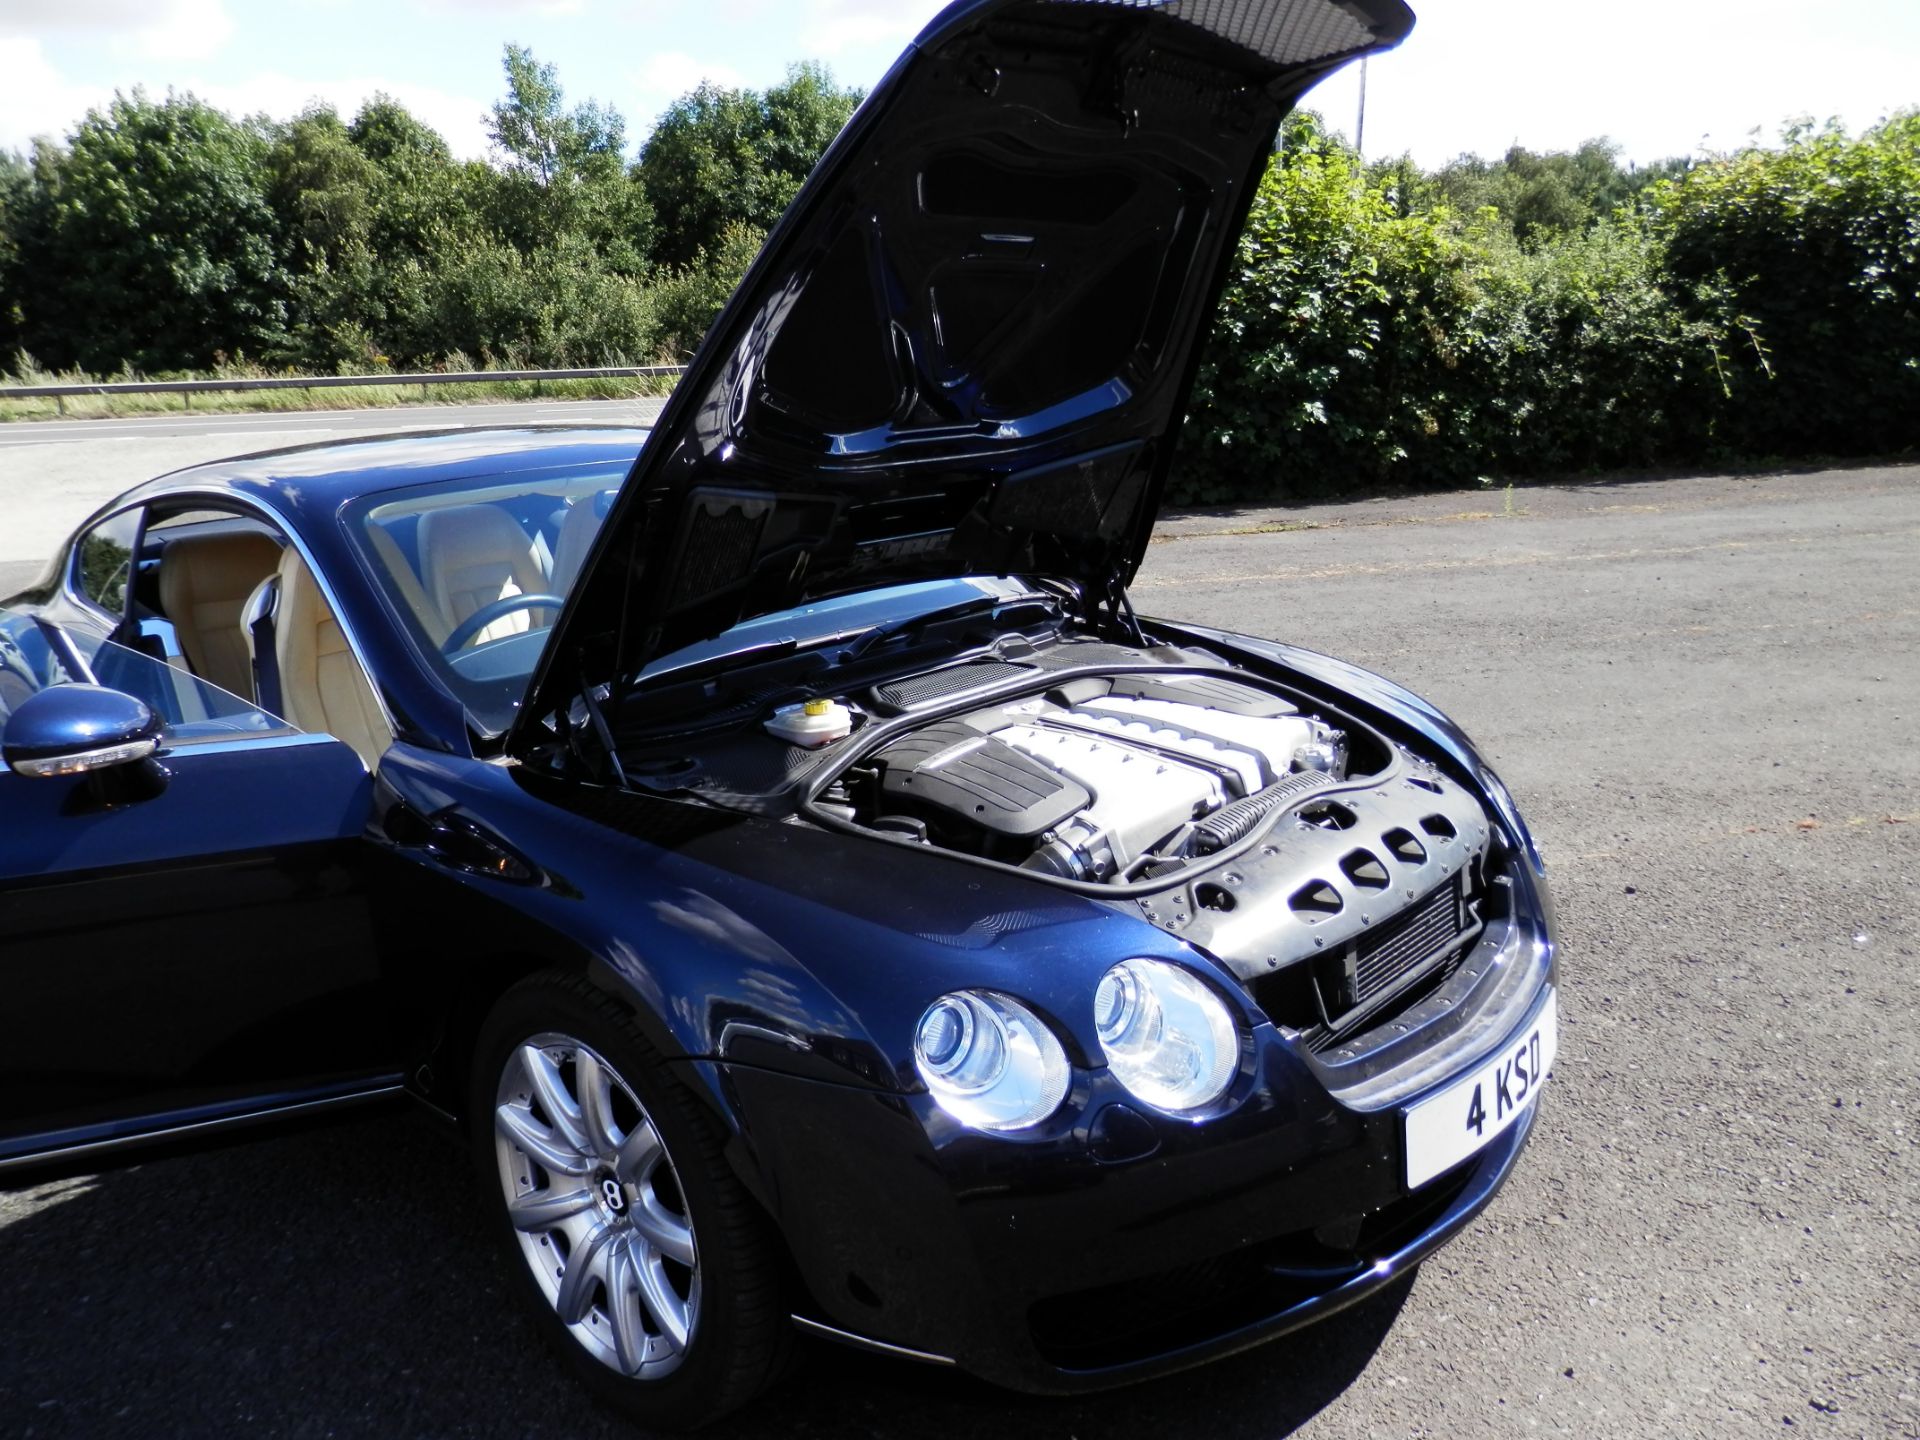 STUNNING 2007 BENTLEY GT CONTINENTAL, 6.0L TWIN TURBO,35K MILES, BLUE, CREAM LEATHER, FULL HISTORY. - Image 9 of 53